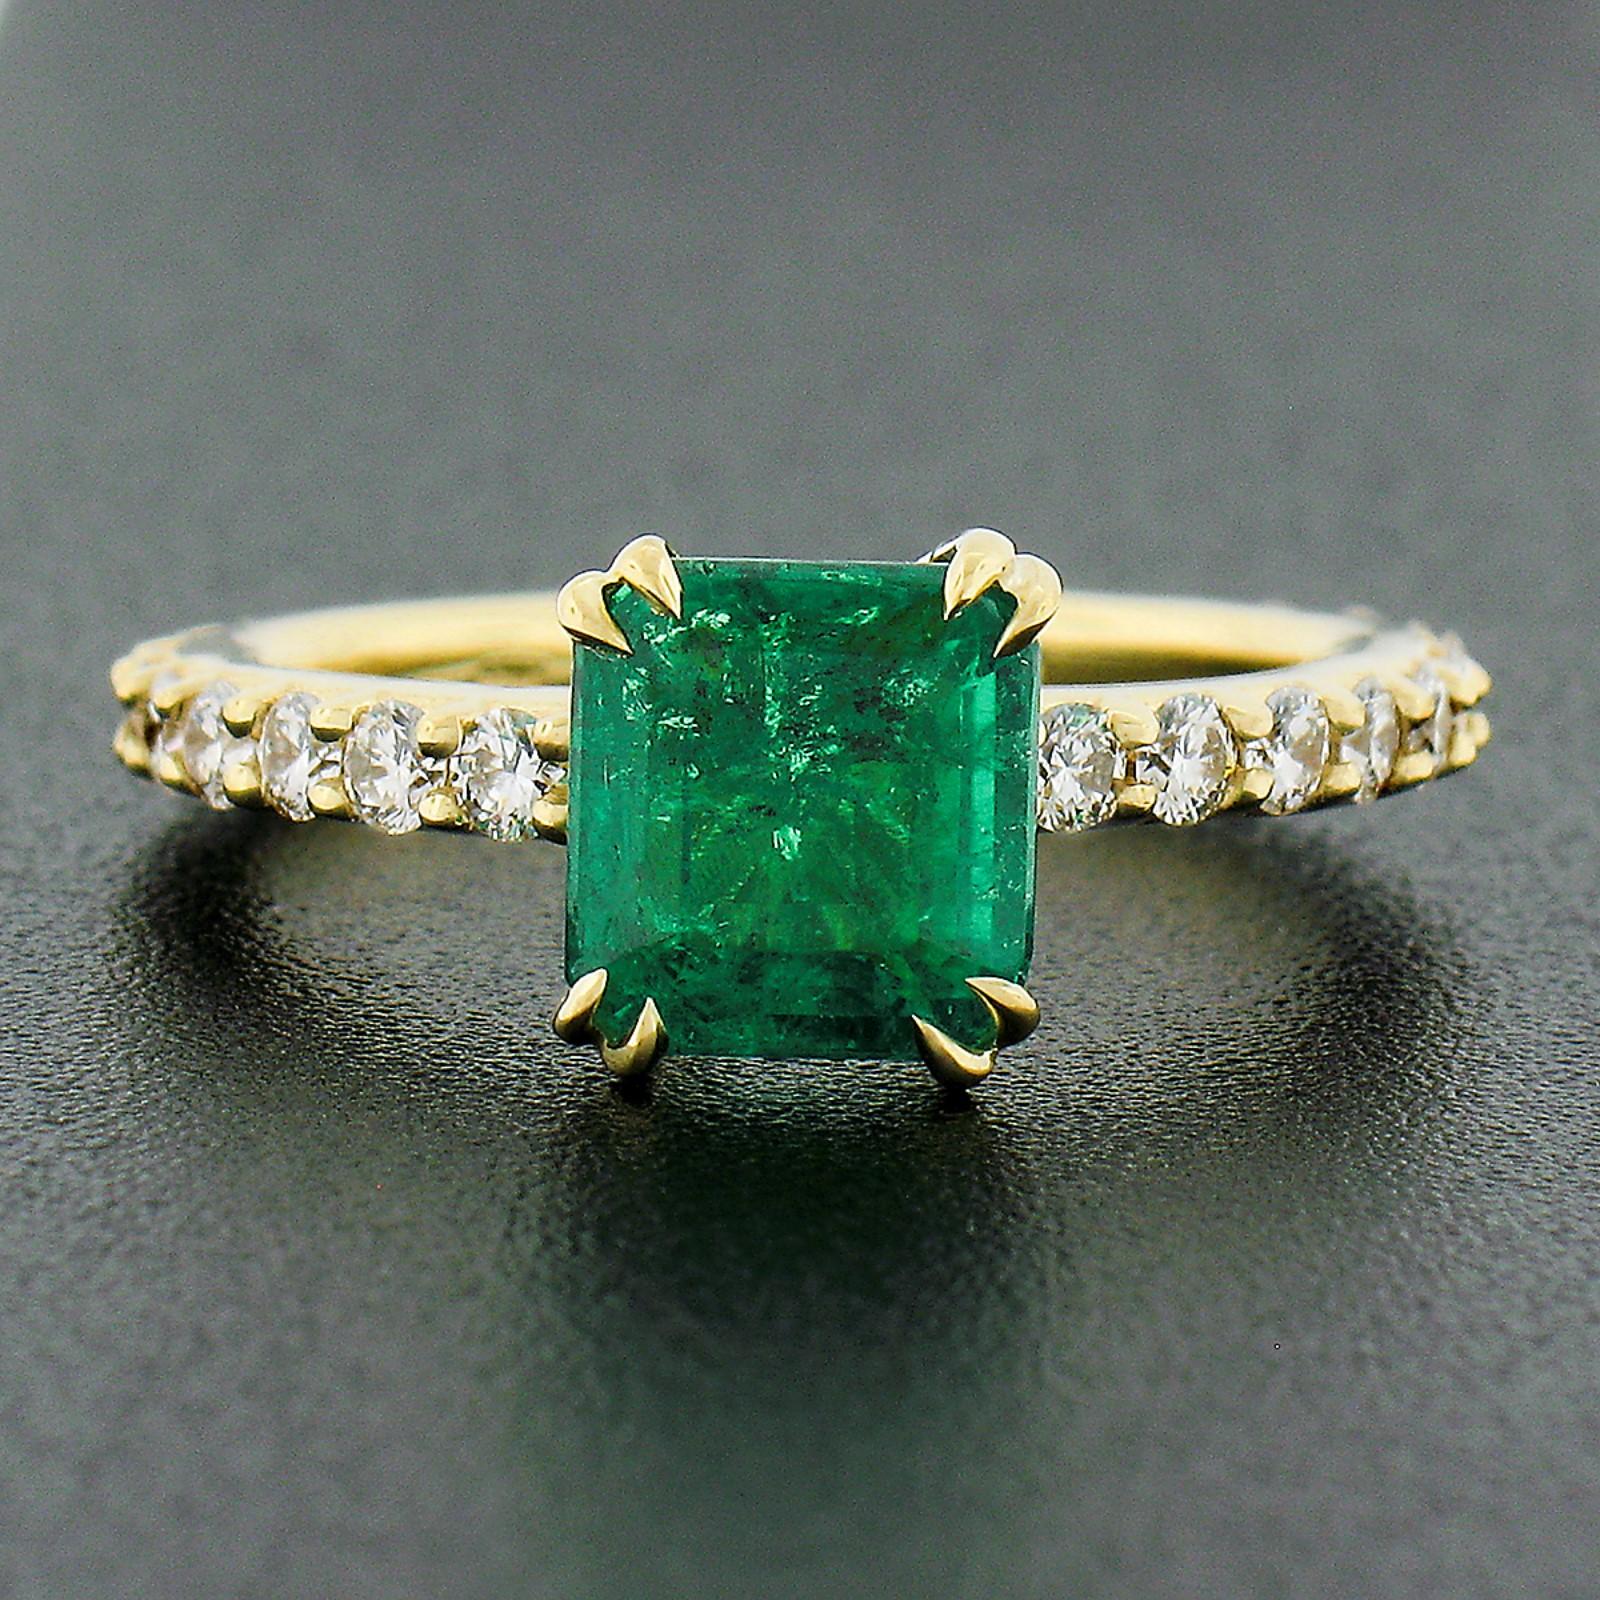 This stunning, SSEF certified, Colombian emerald and diamond engagement or cocktail ring is newly crafted in solid 18k yellow gold. The ring features a truly breathtaking, natural, octagonal step cut emerald stone that displays the finest and most